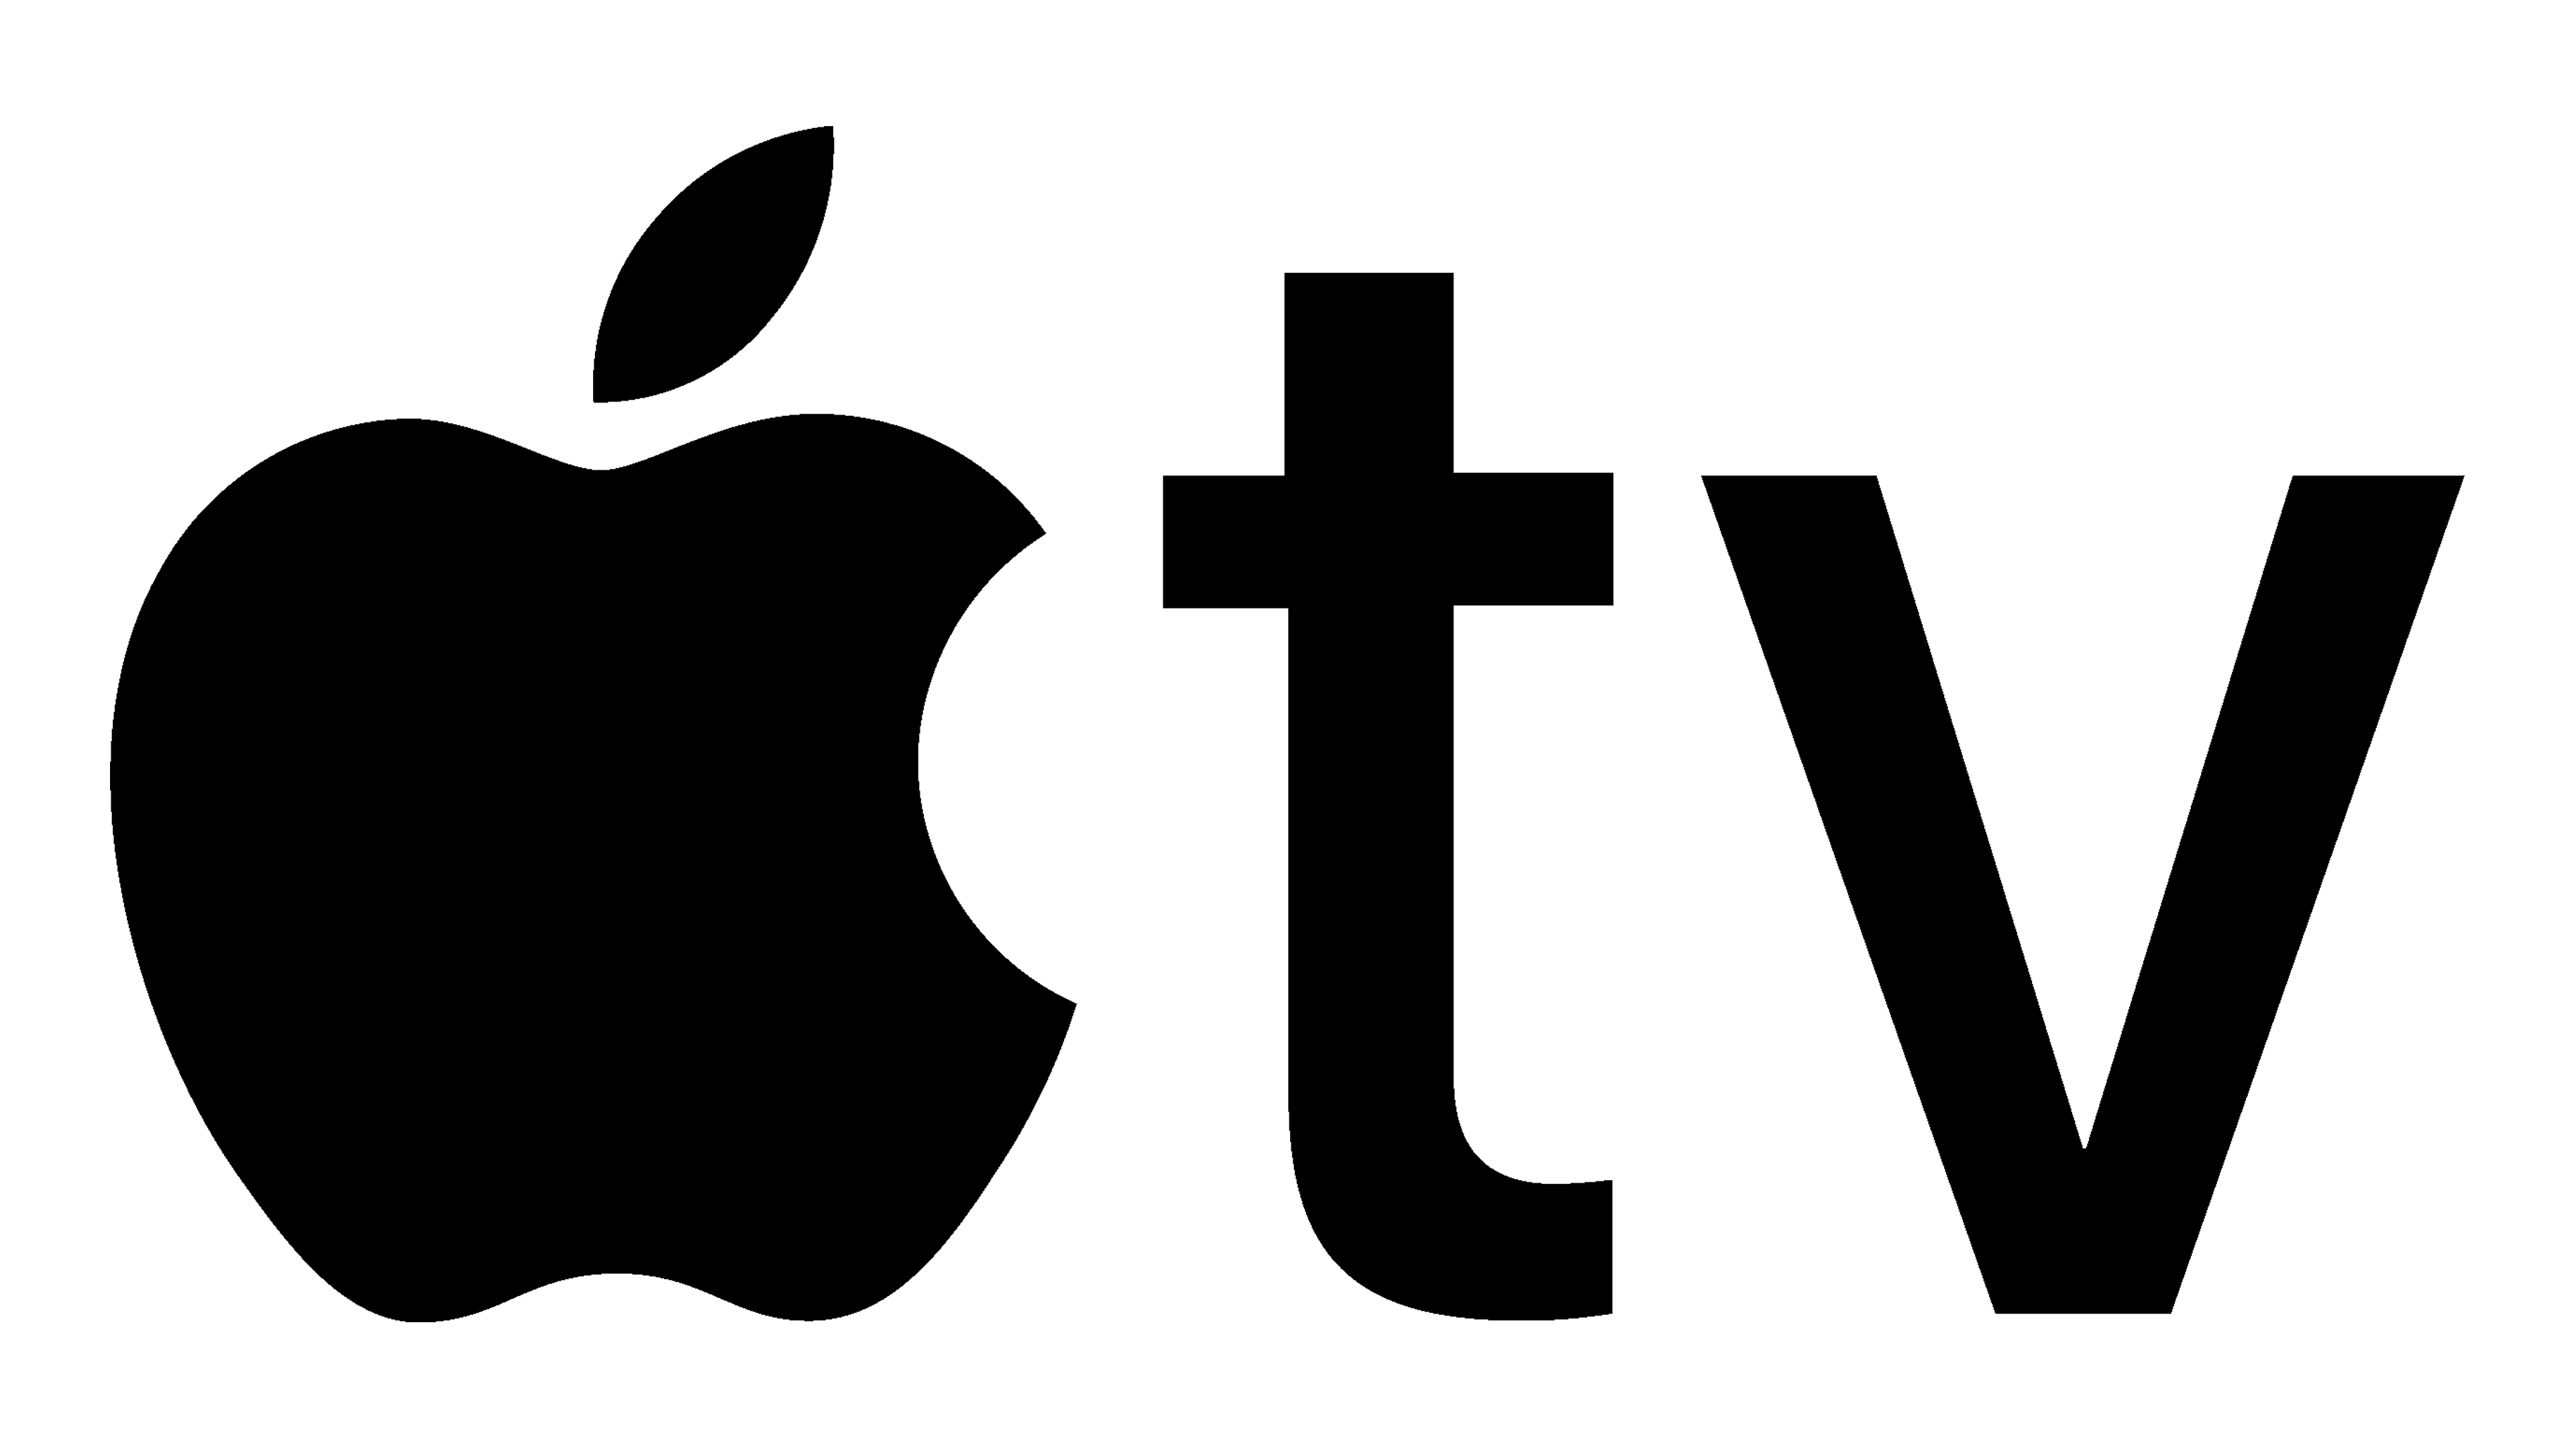 Over Fifty Fitness - Apple TV logo